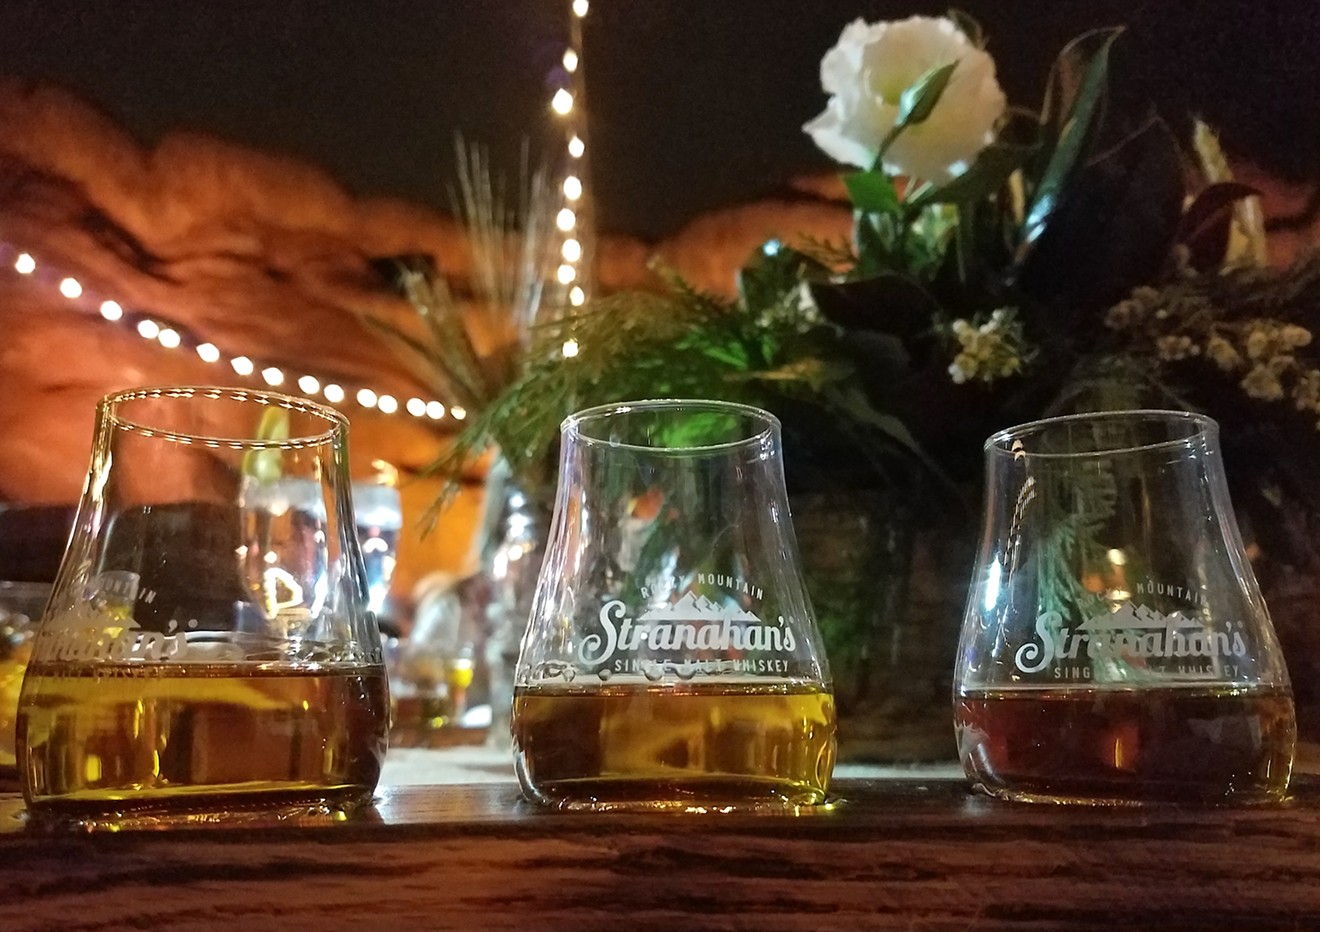 Sampling Stranahan's three whiskies on the stage of Red Rocks Amphitheater.